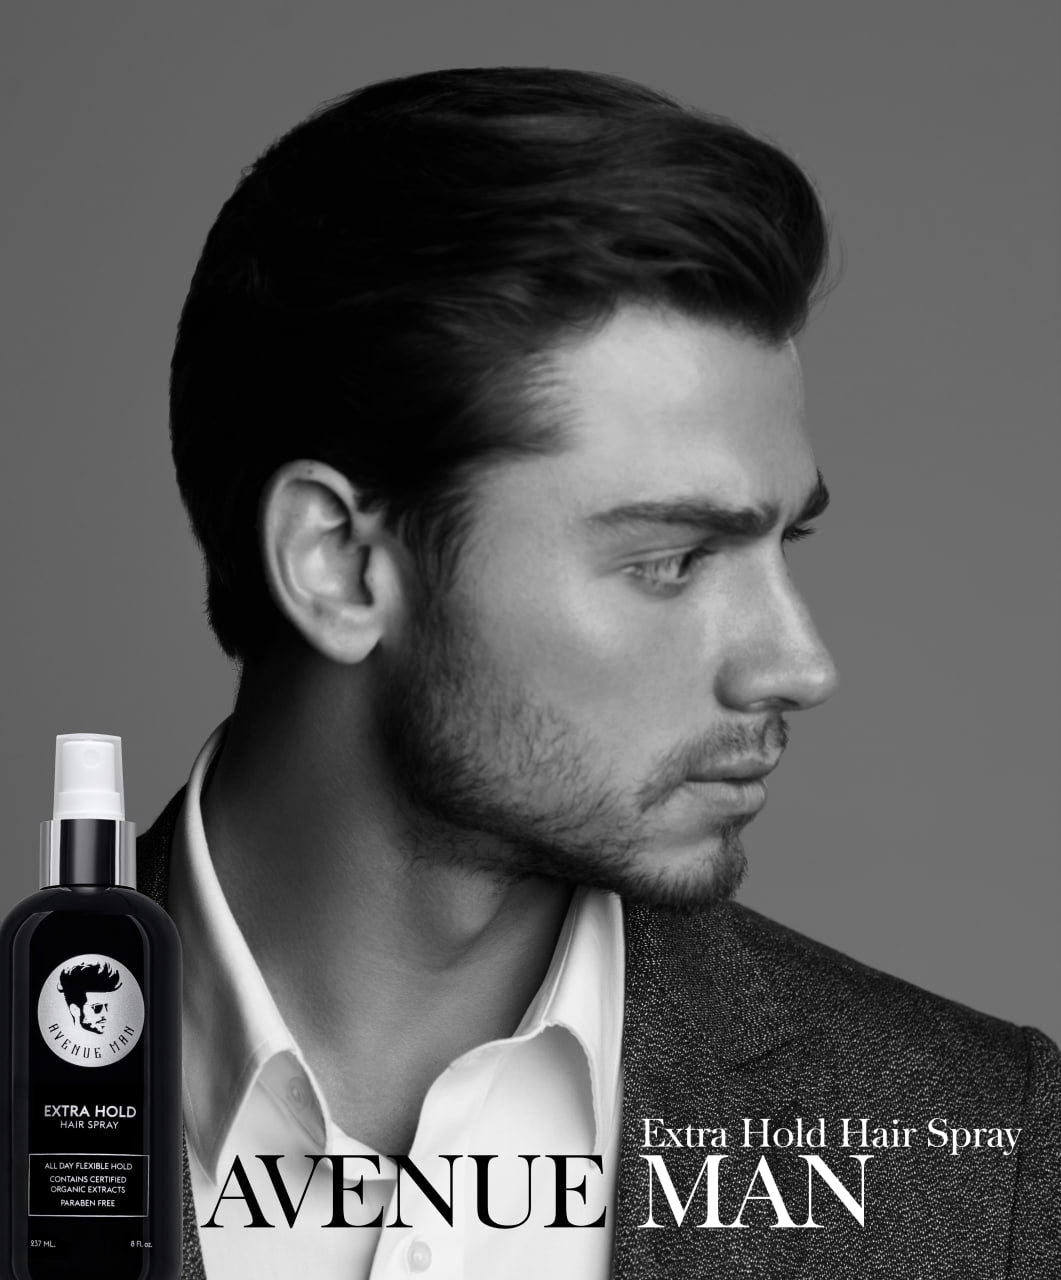 Discover Extra Hold Hair Spray for Impeccable Styling